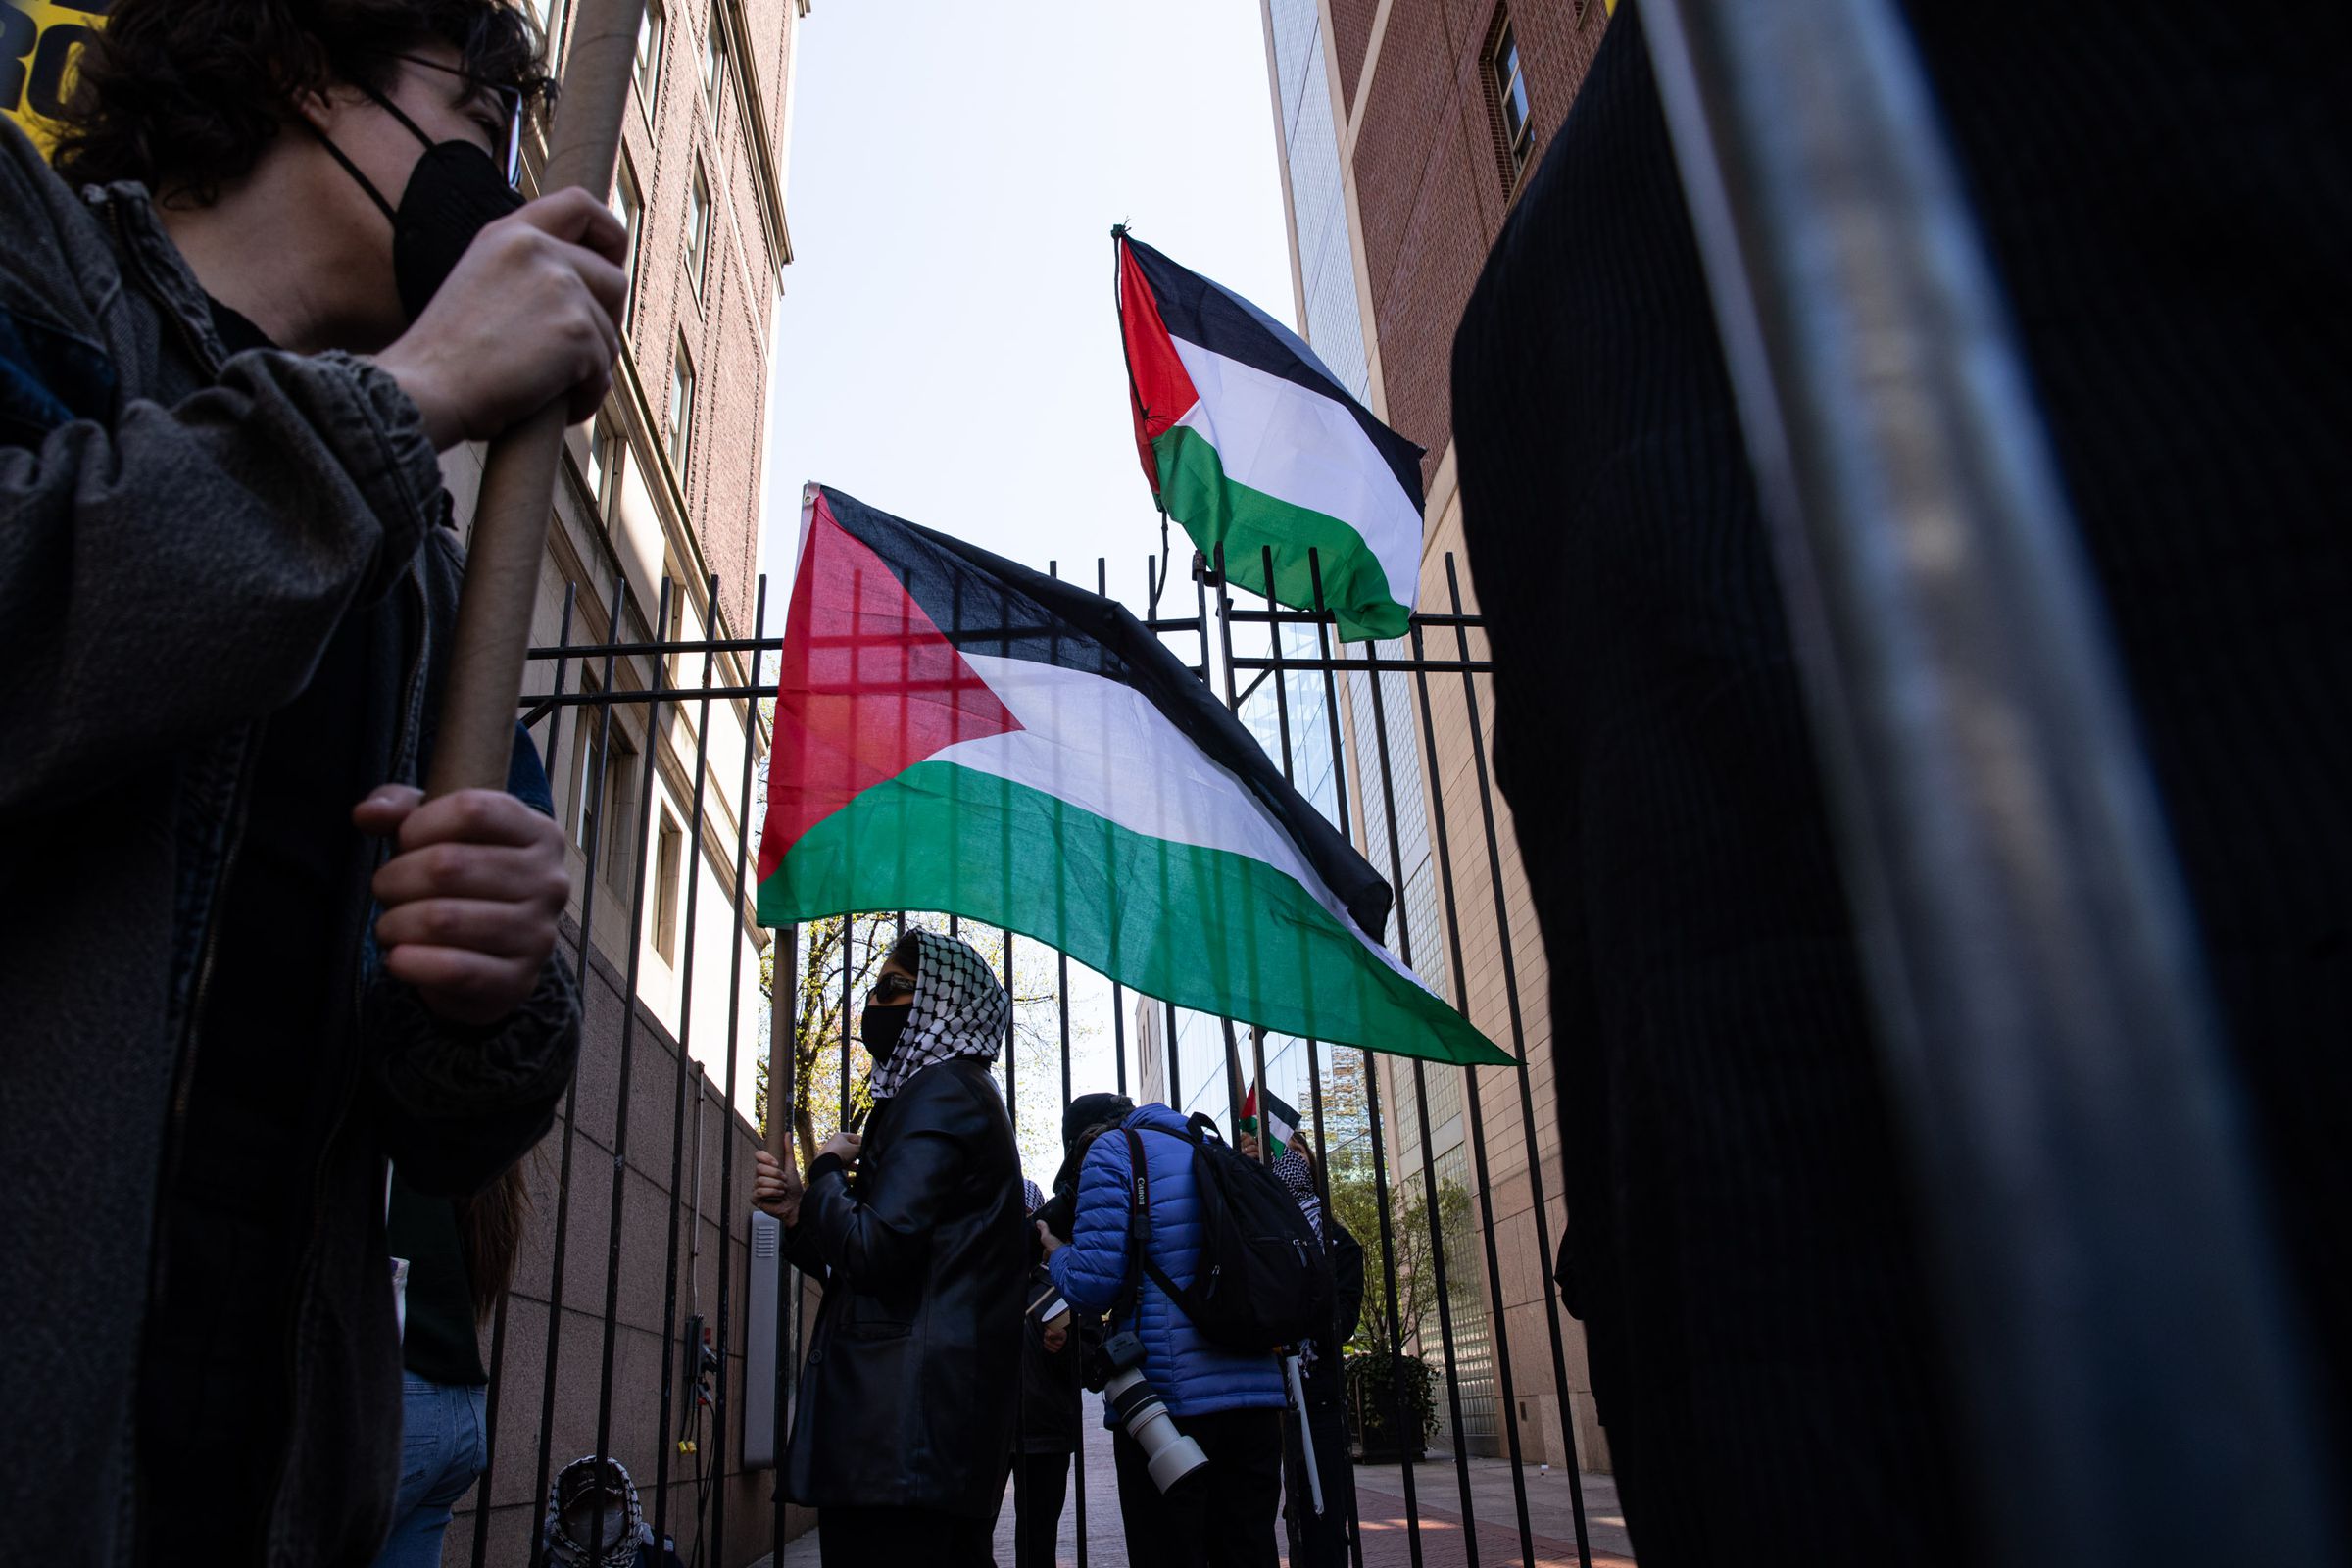 A student wears a mask and kaffiyeh and carries a Palestinian flag.